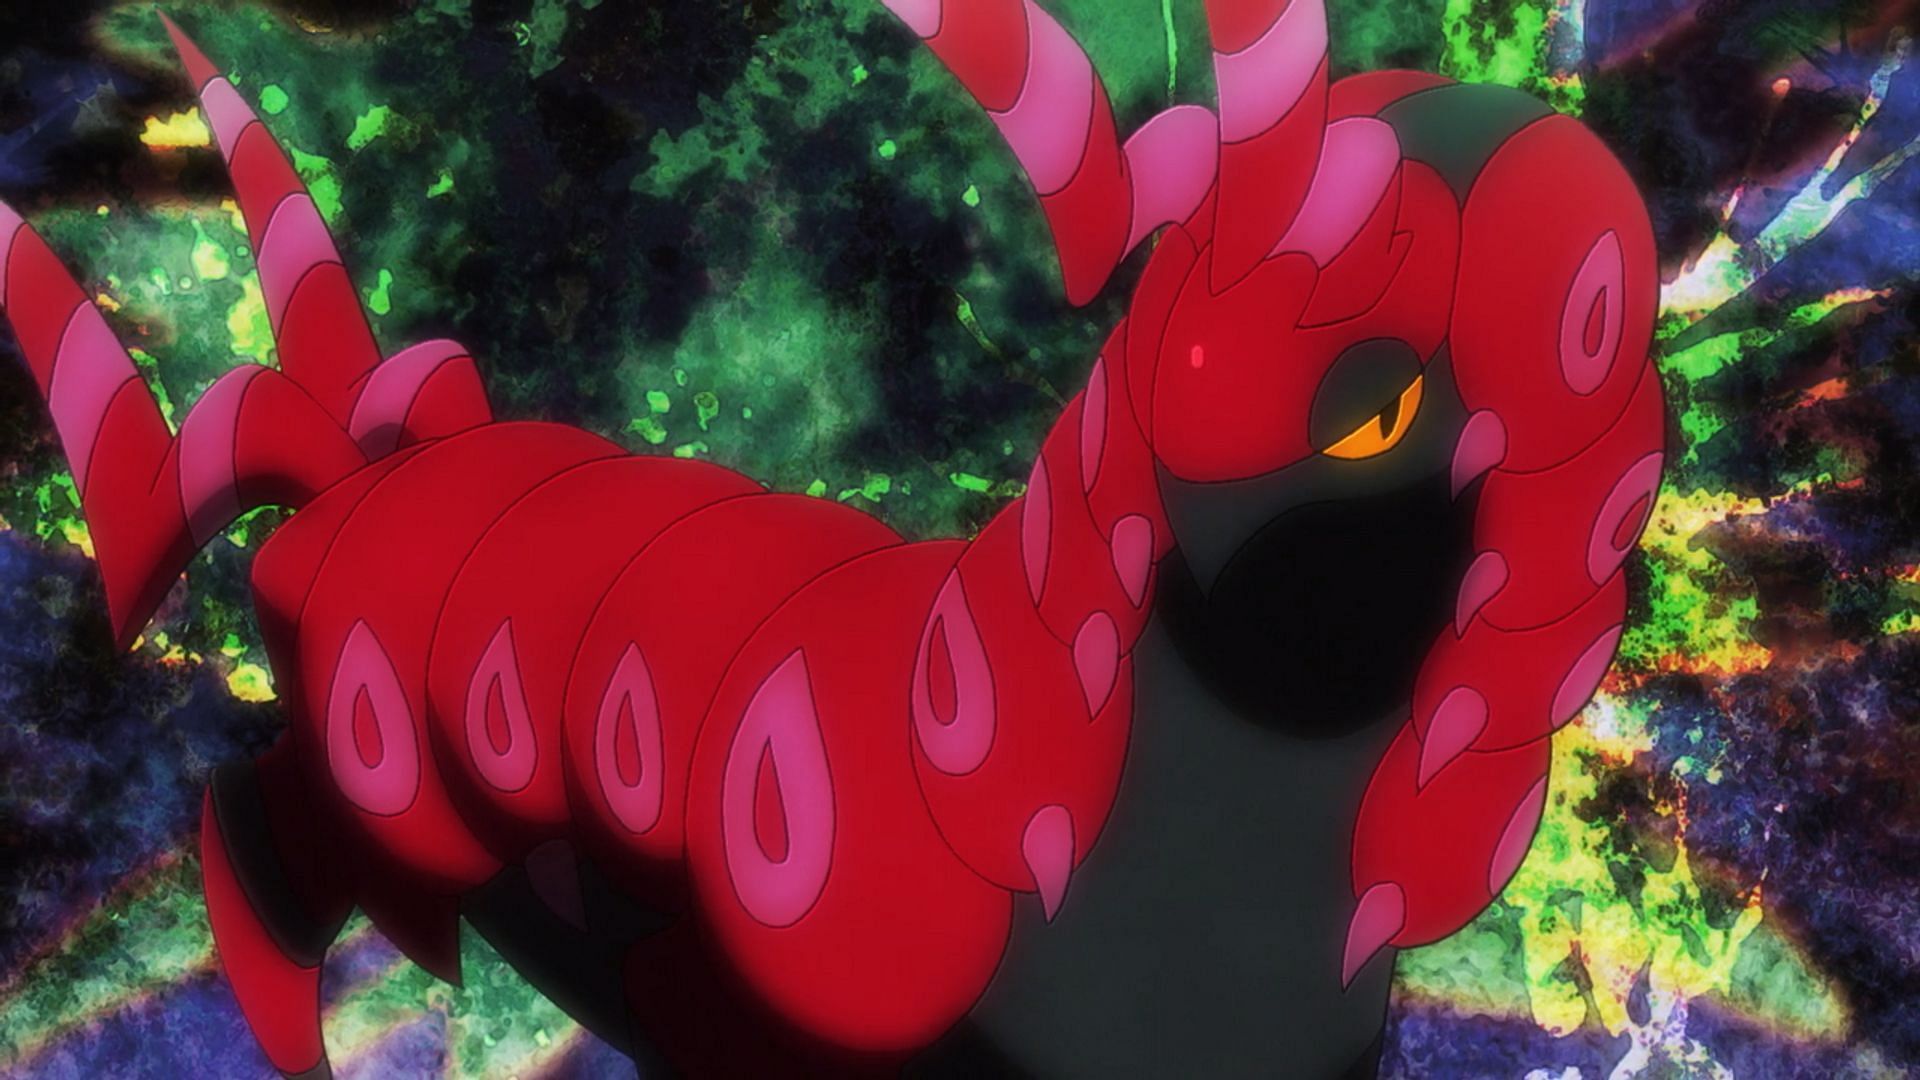 Scolipede Hd Wallpapers